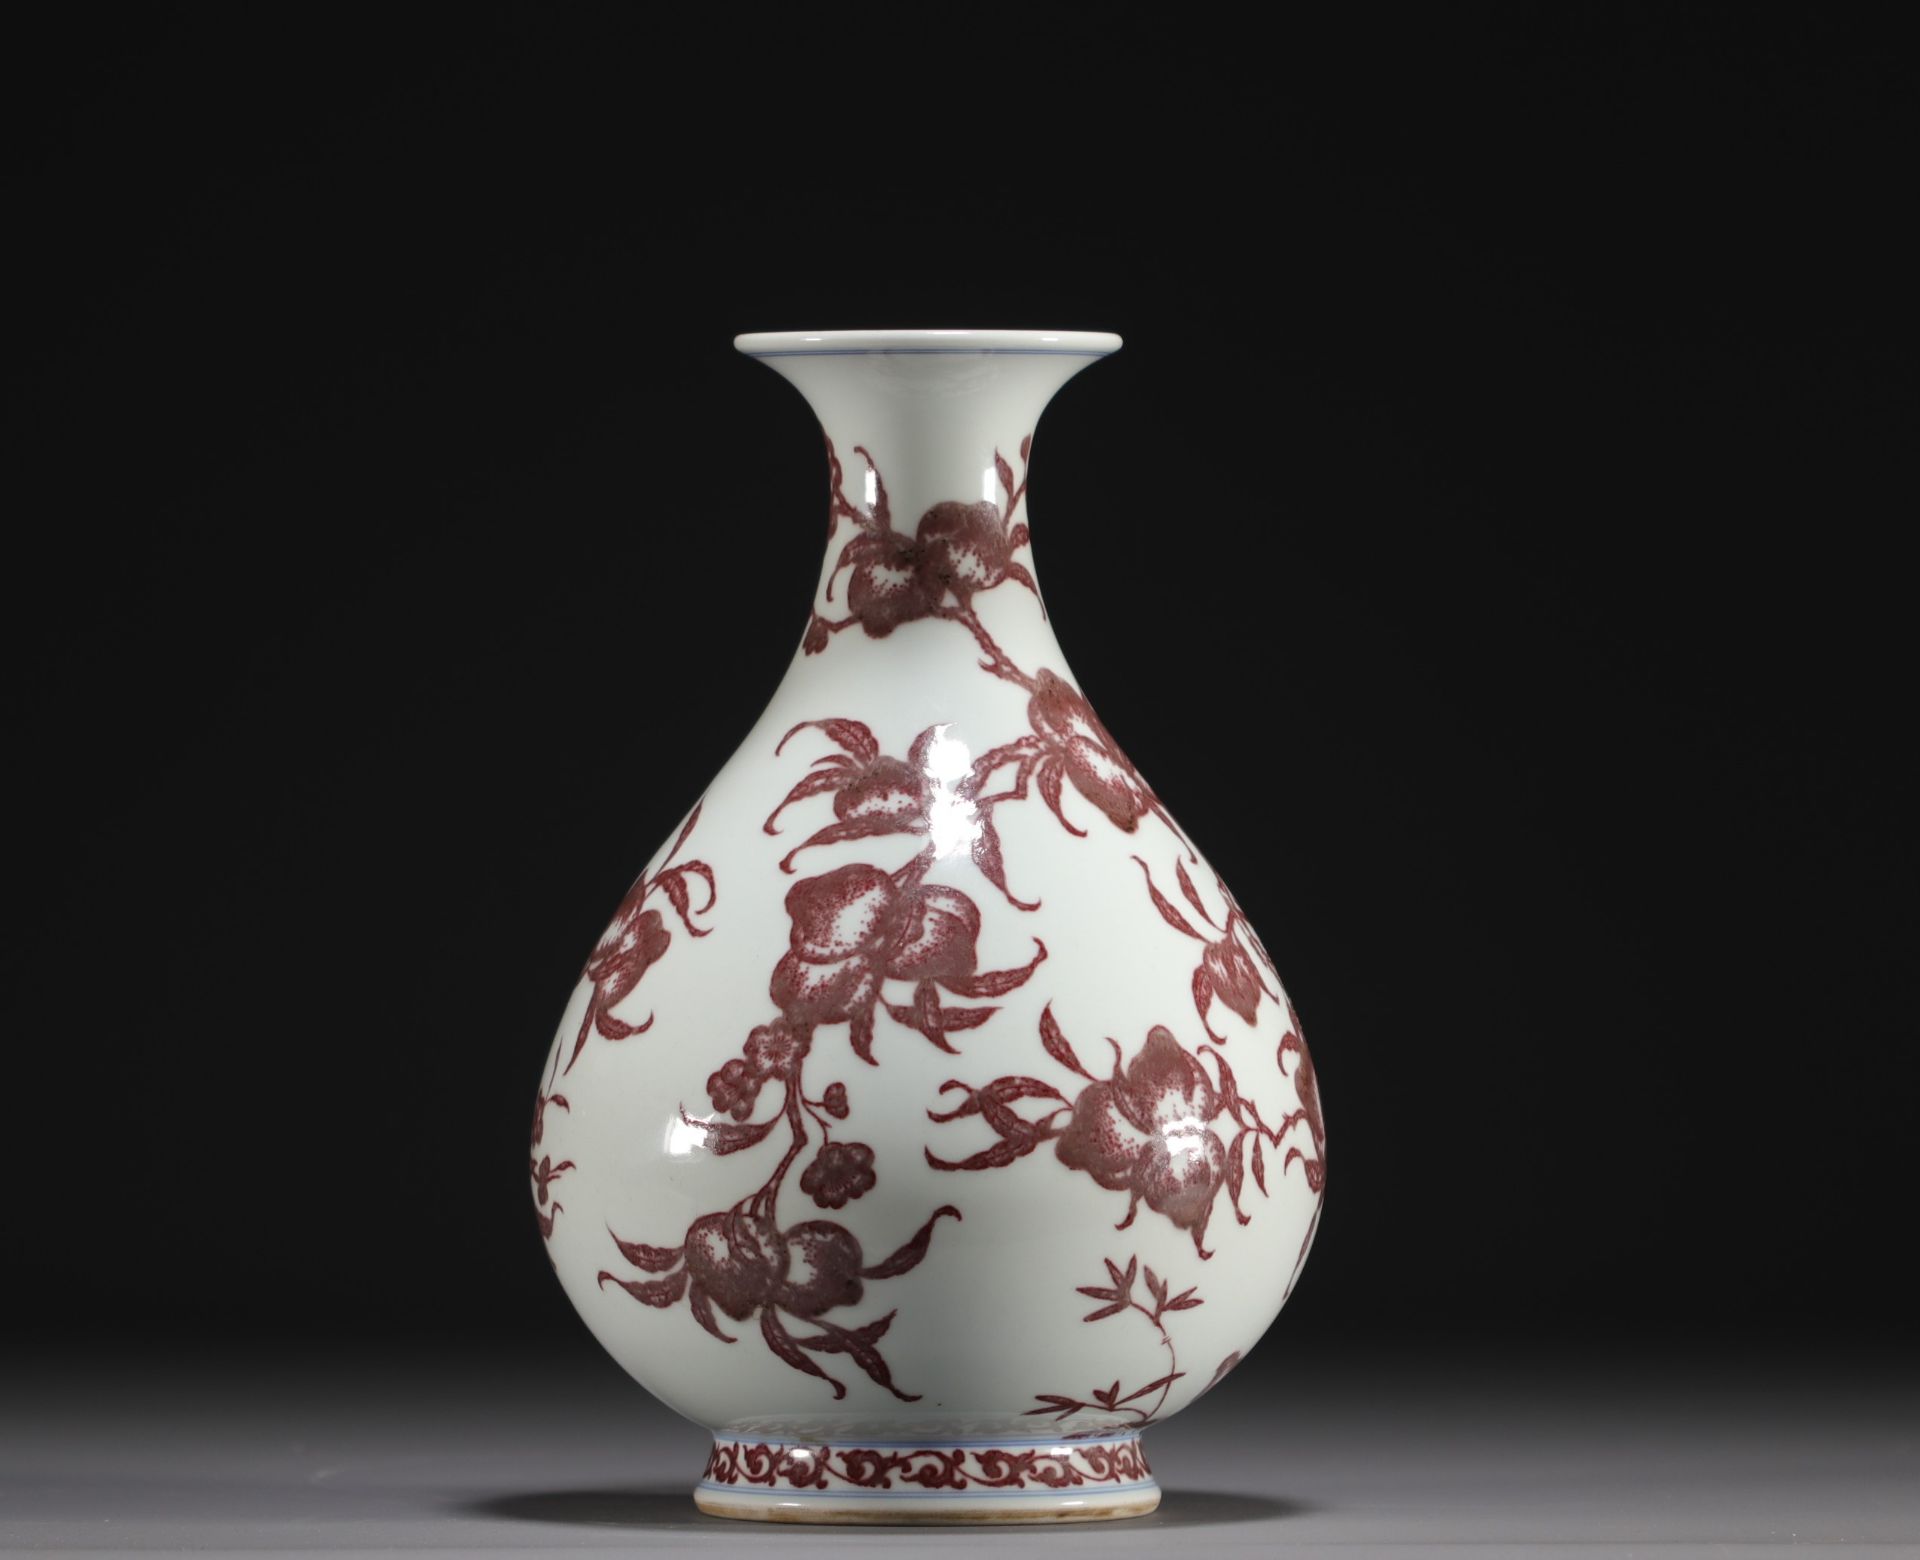 China - Porcelain vase decorated with iron-red peaches, Qing period.